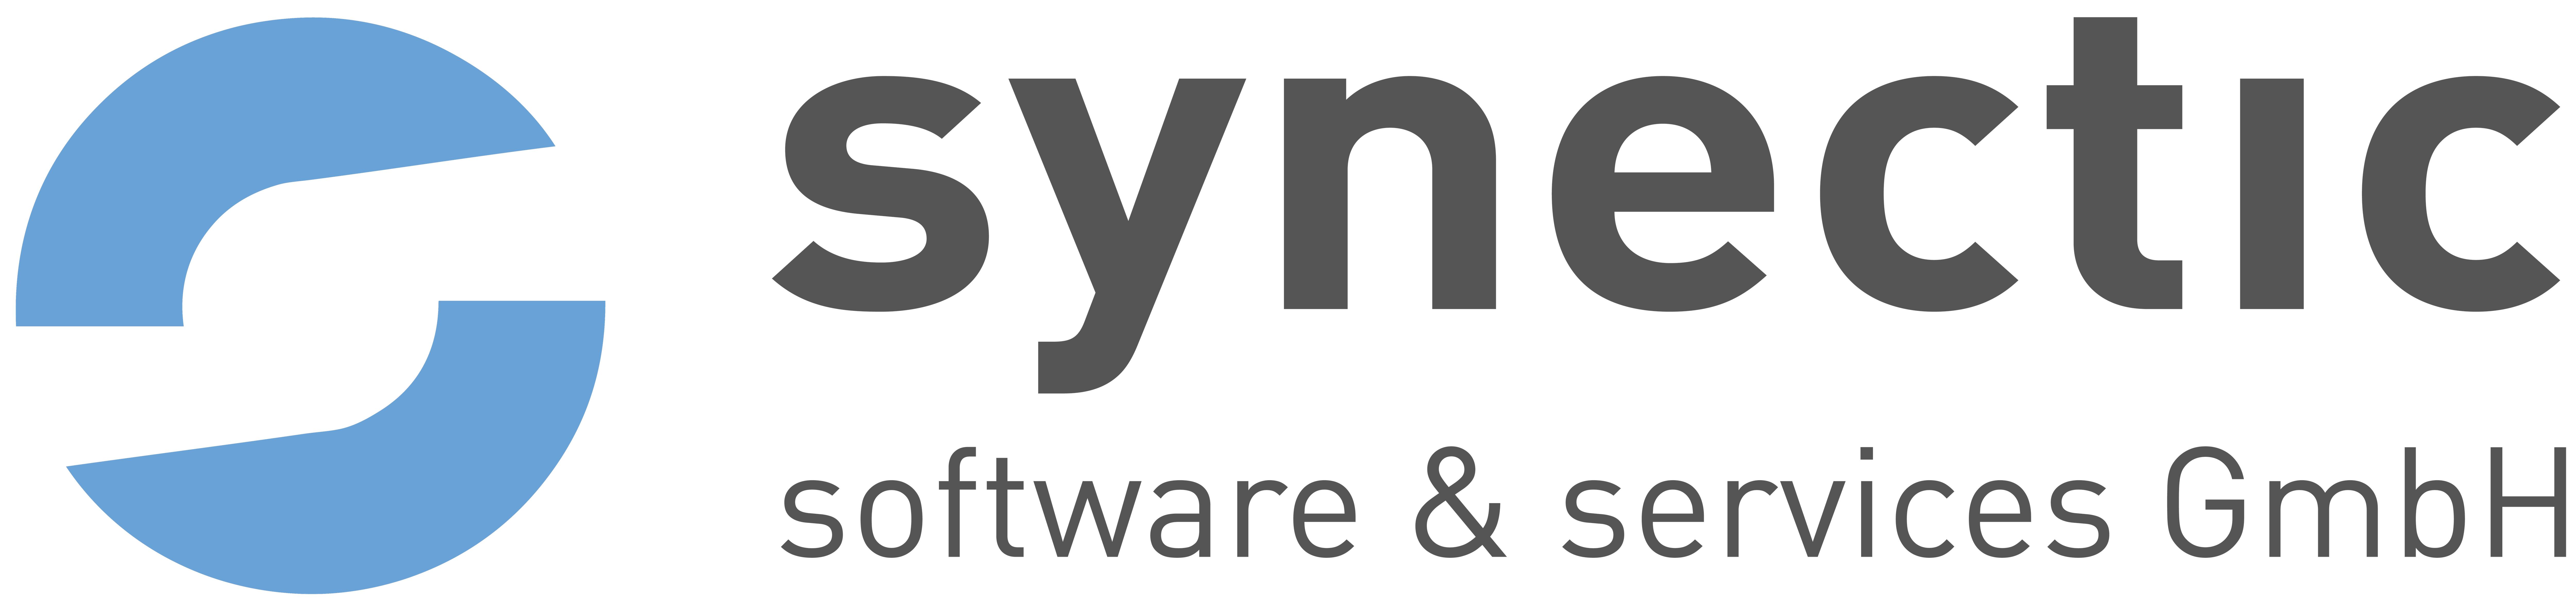 synectic software & services GmbH